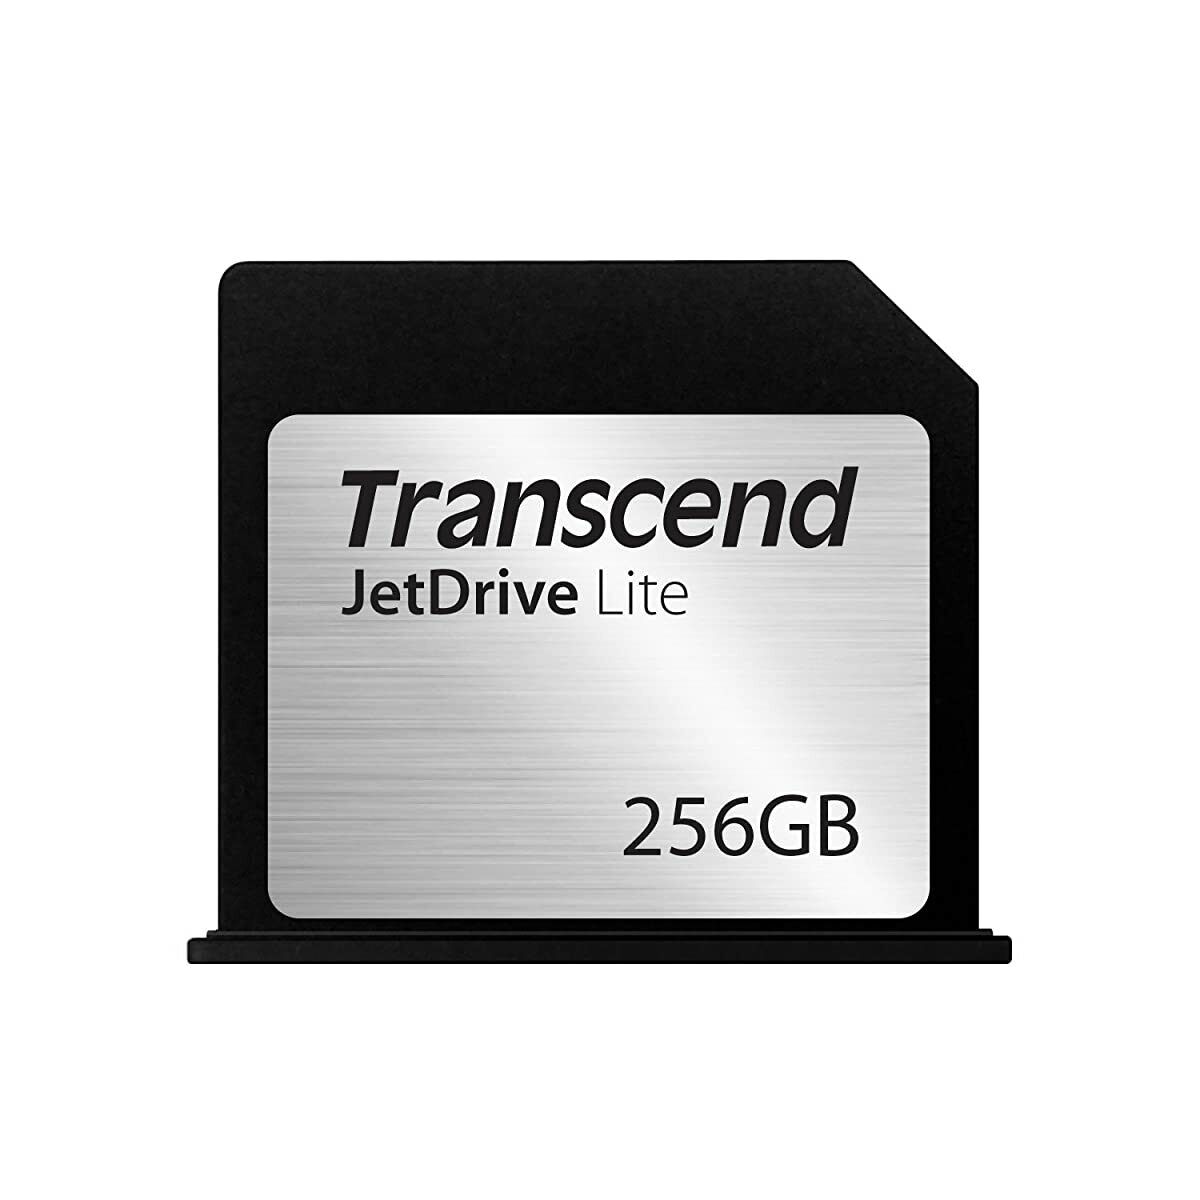 Transcend Macbook Air SD slot compatible extended memory card 256GB TS256GJDL130